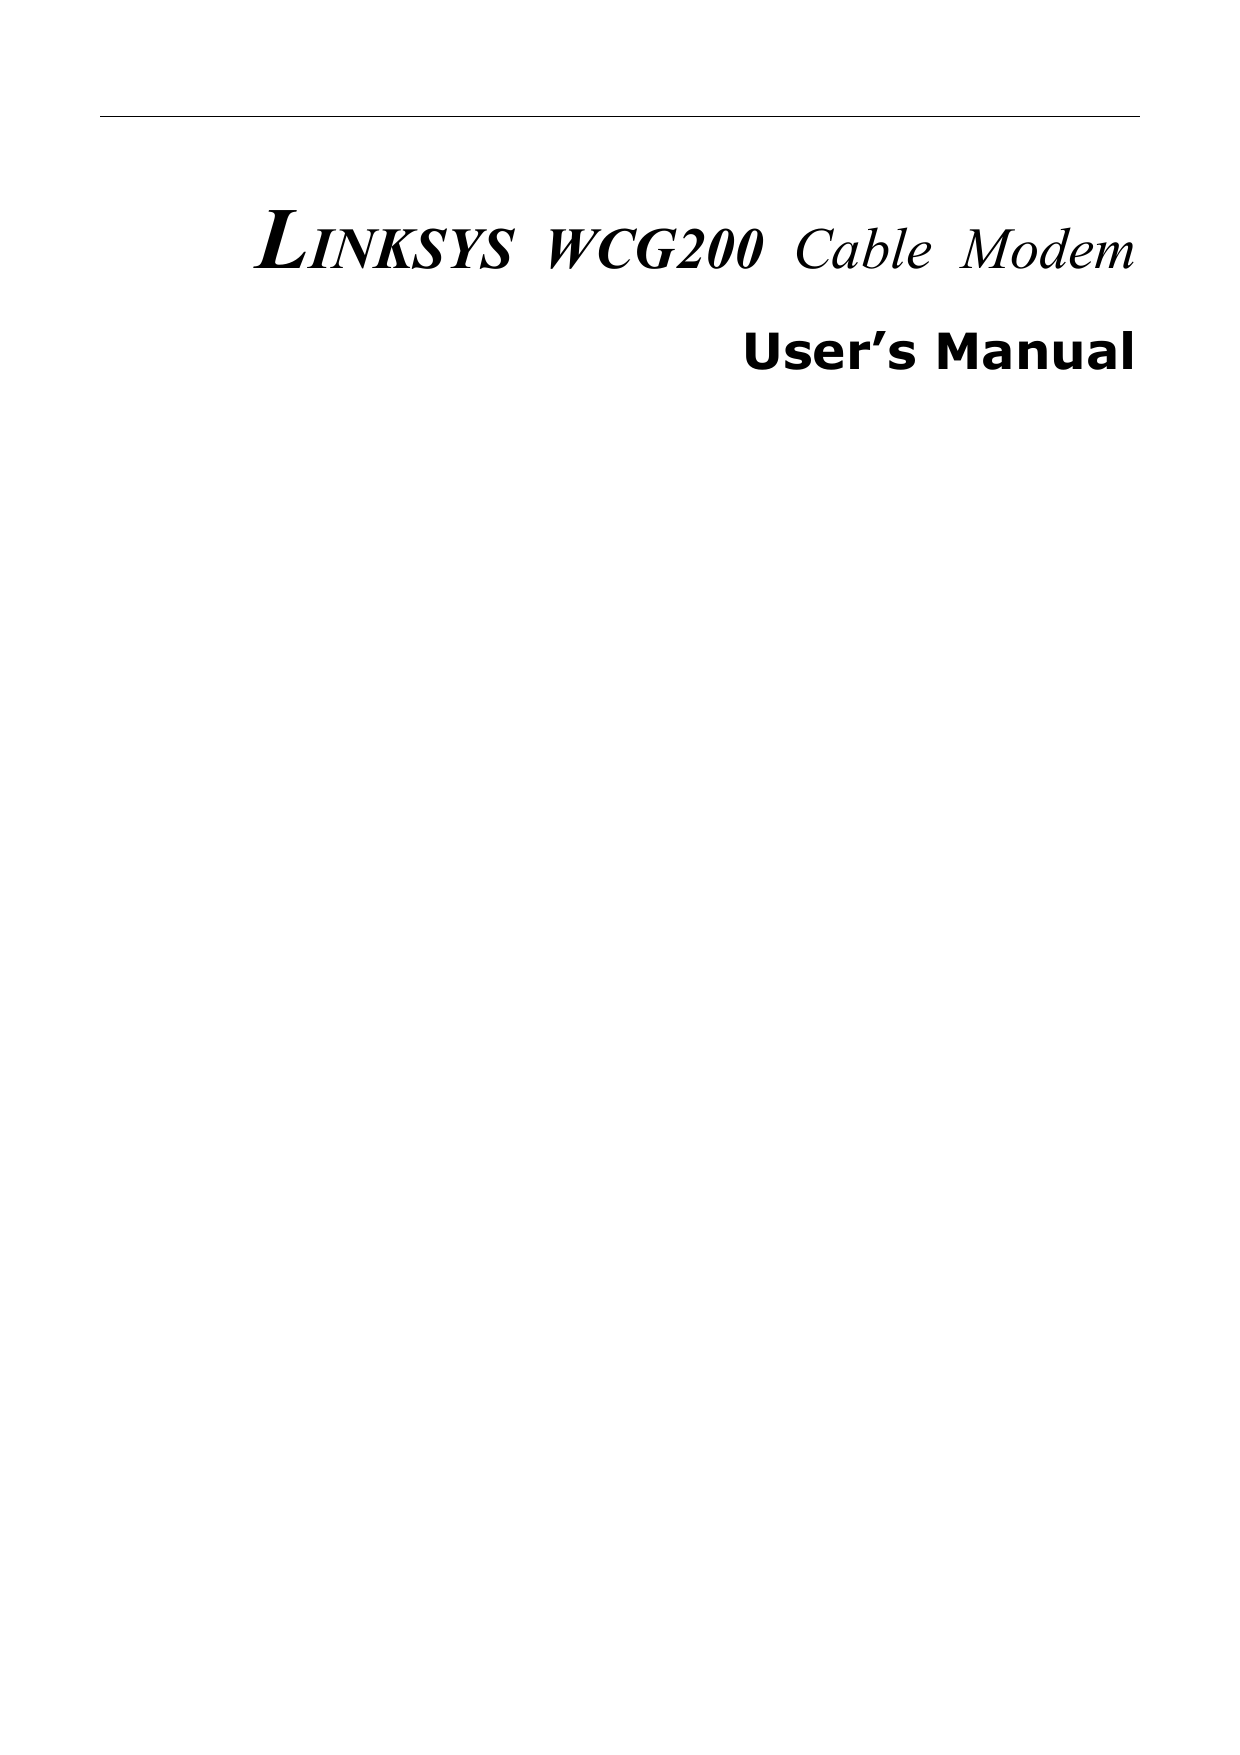   LINKSYS WCG200 Cable Modem User’s Manual 